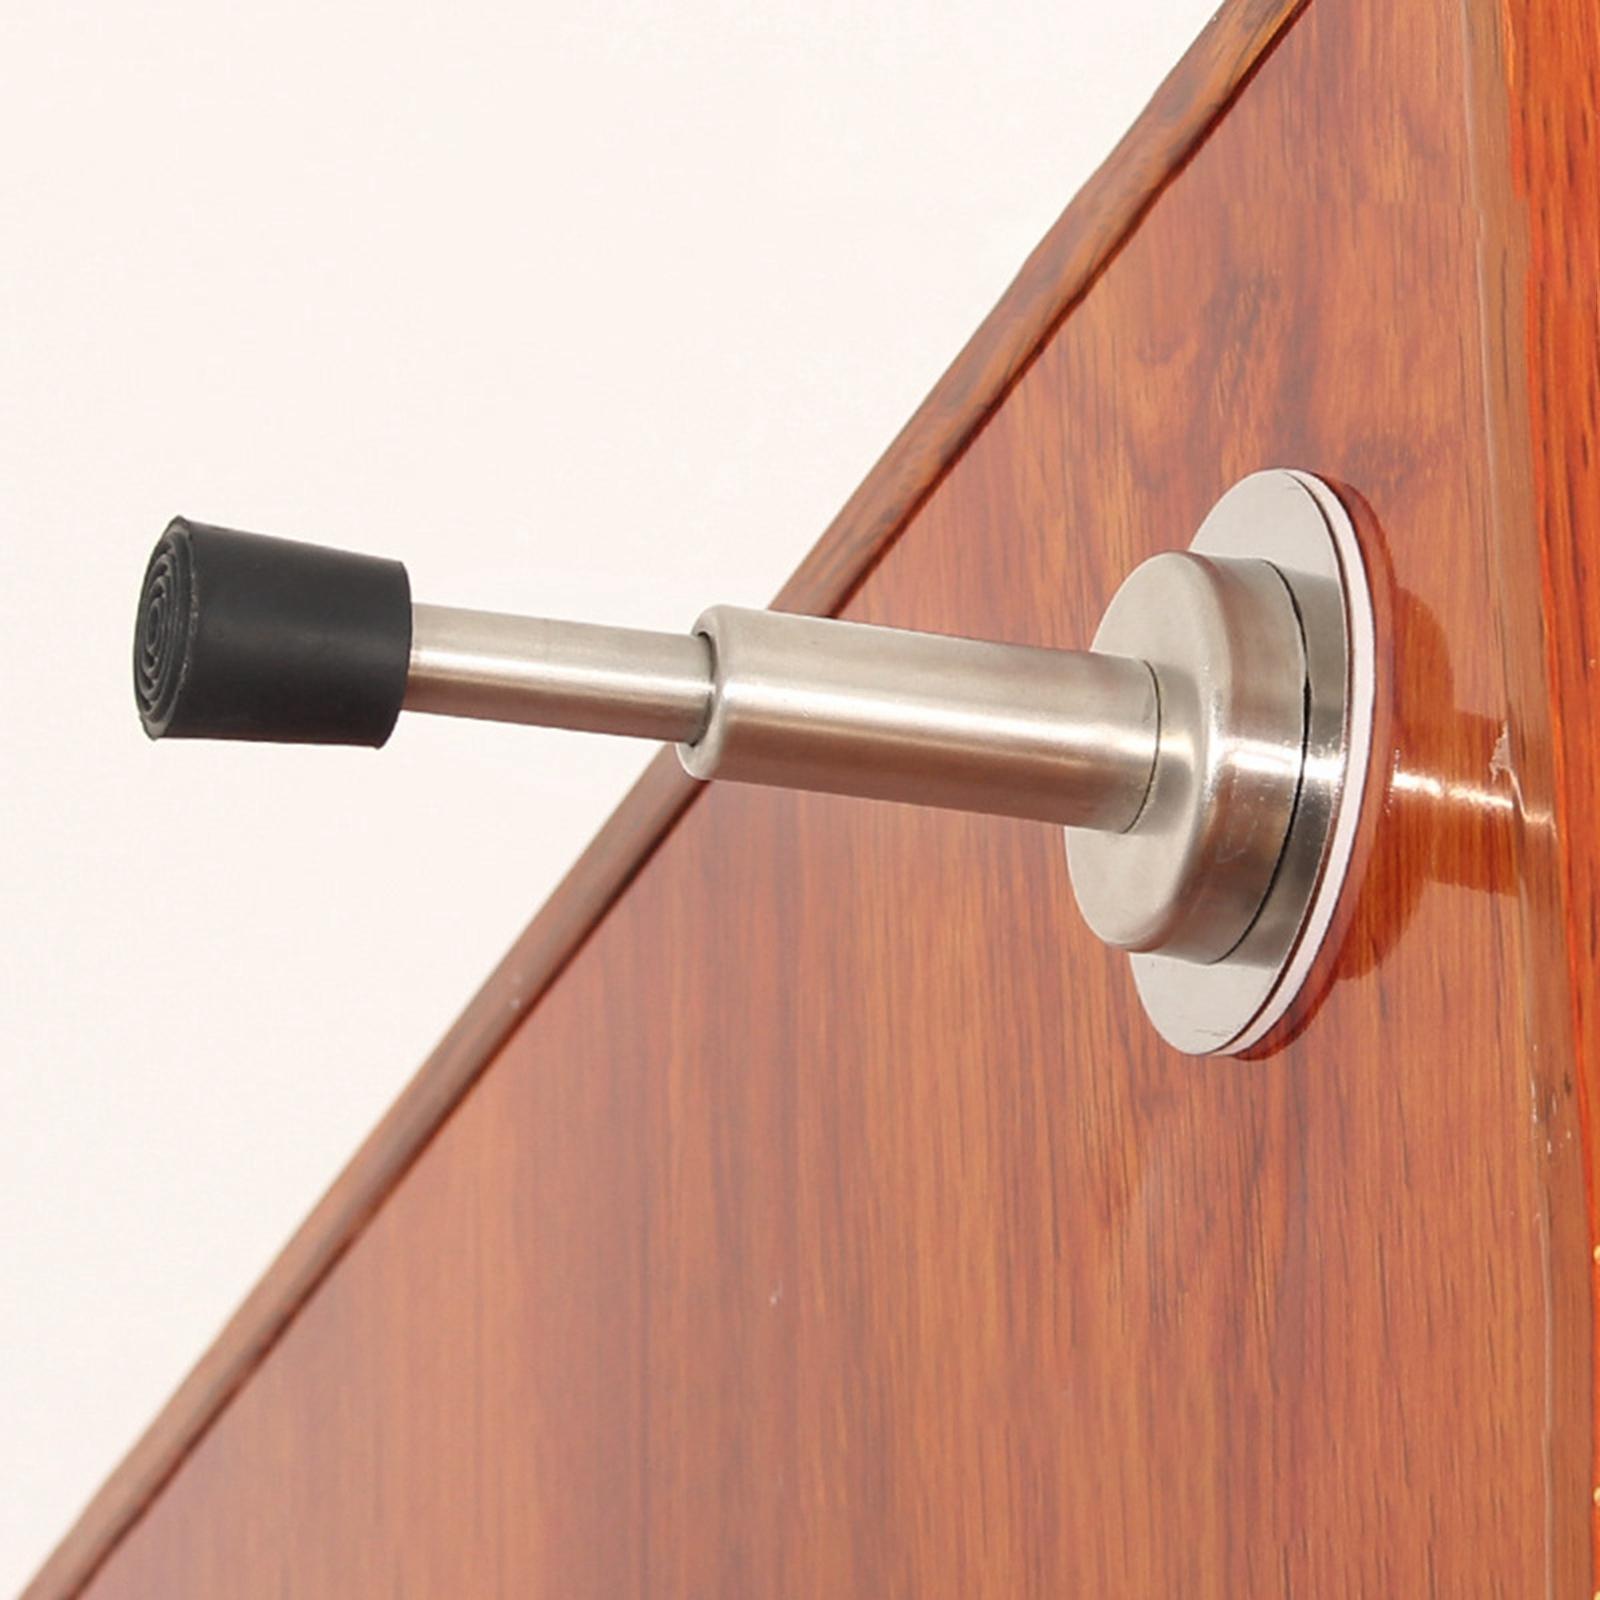 Door Stopper Wall Protector Stainless Steel with Rubber Buffer Adhesive